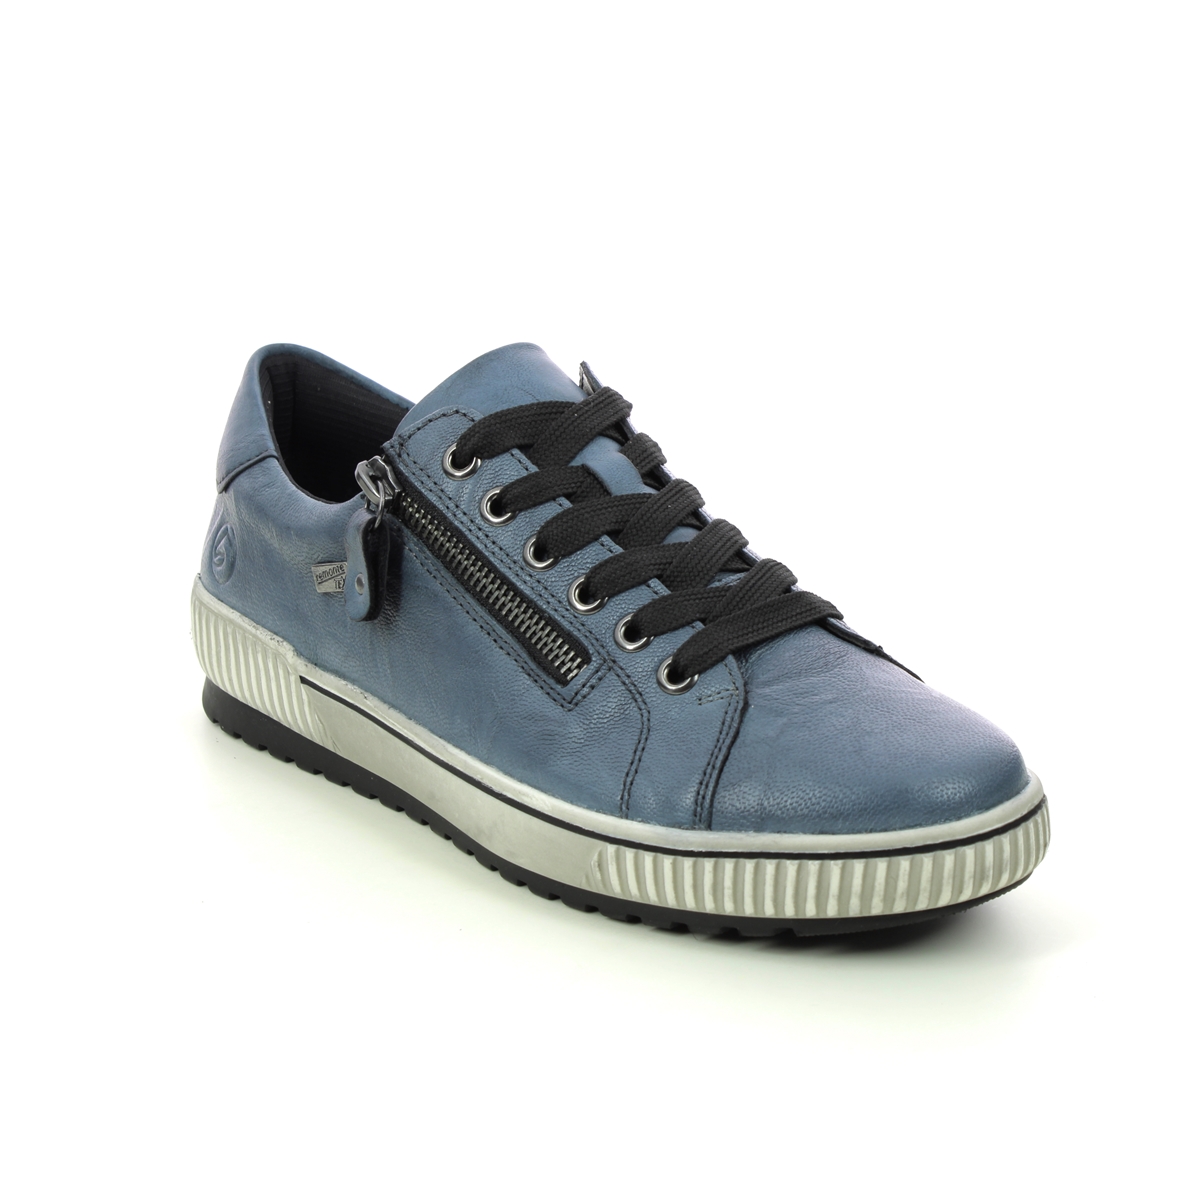 Remonte Tanash Tex Blue Leather Womens Lacing Shoes D0700-14 In Size 42 In Plain Blue Leather